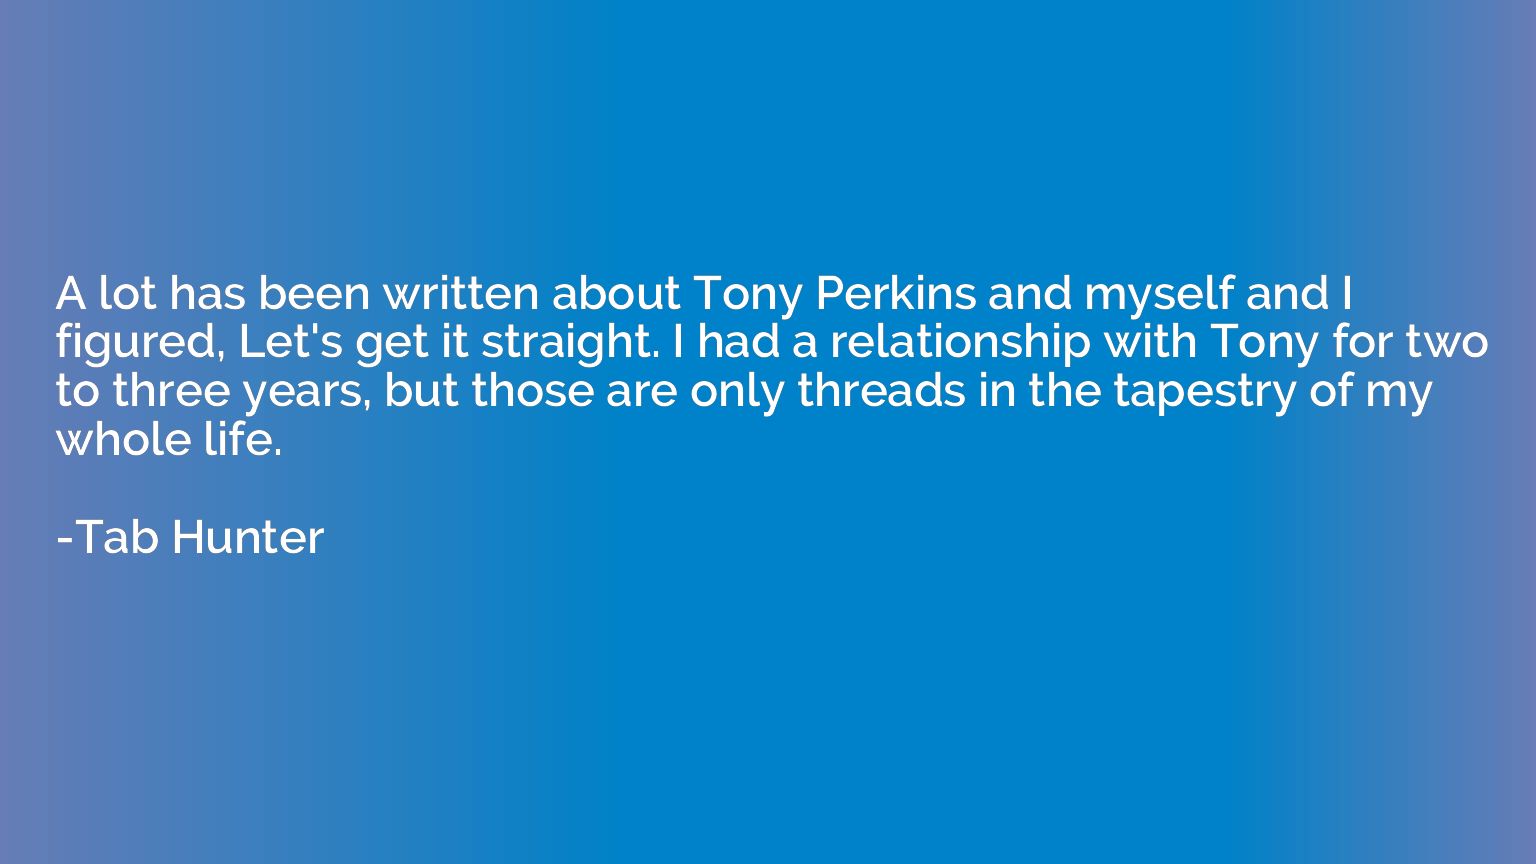 A lot has been written about Tony Perkins and myself and I f